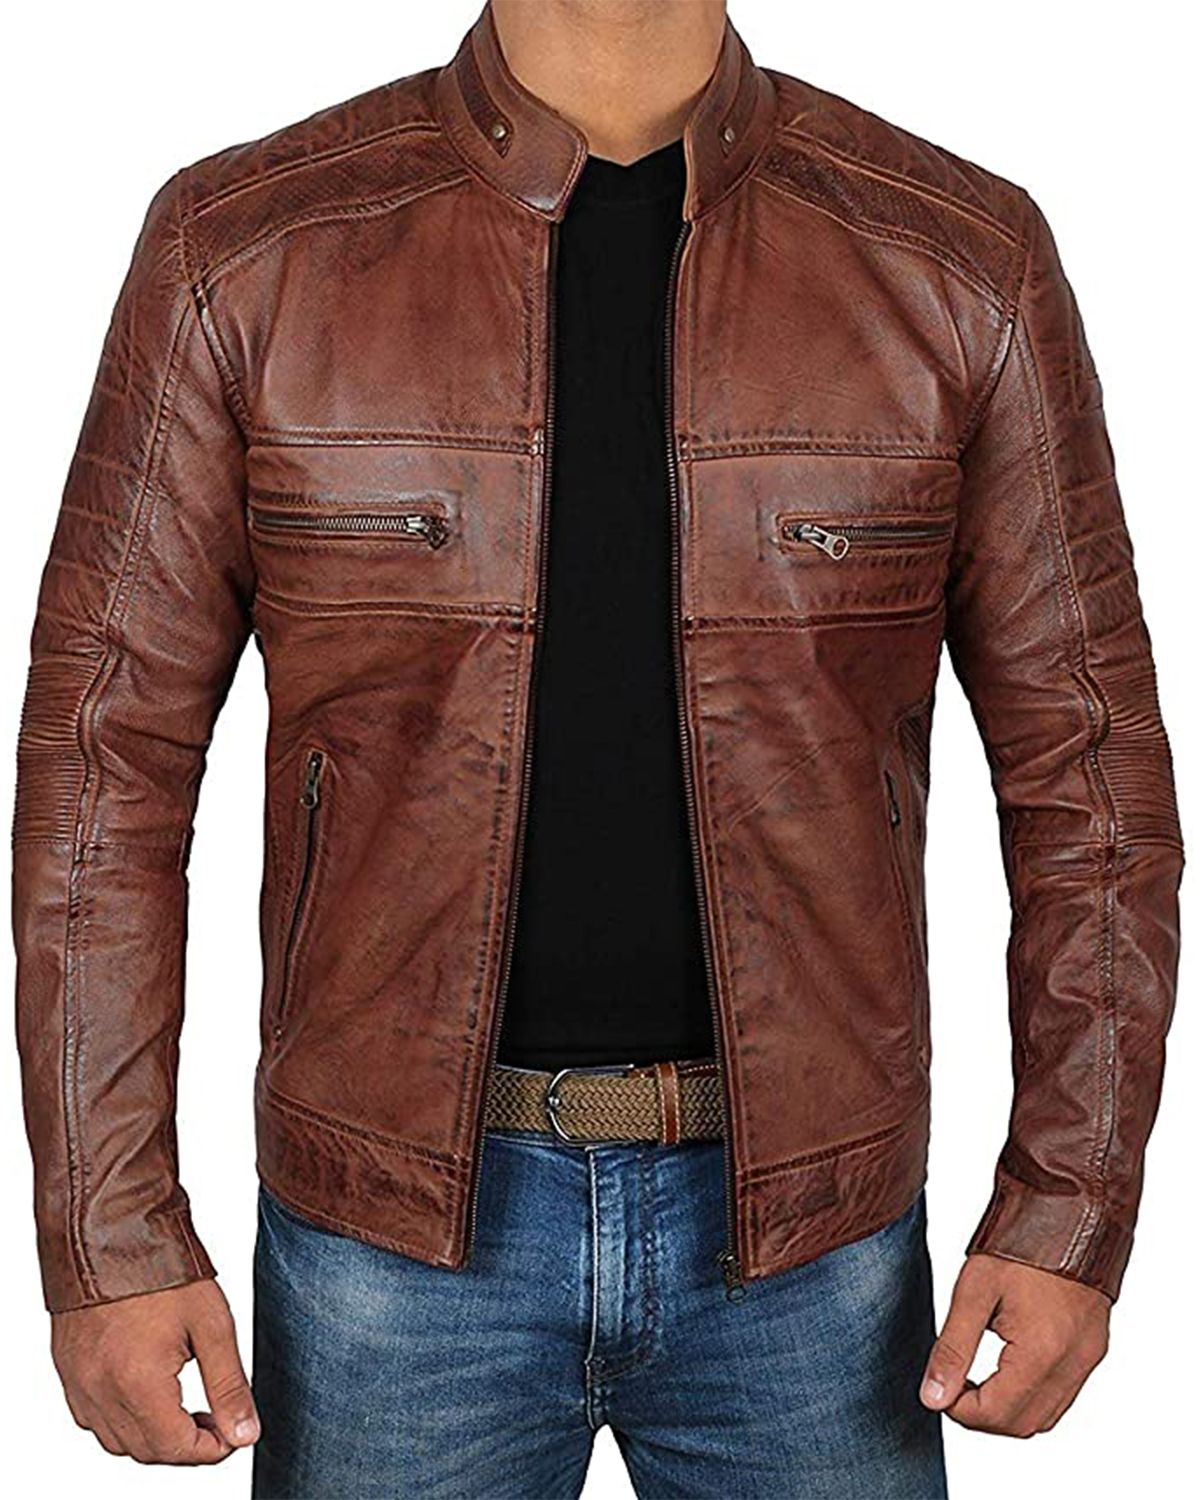 MotorCycleJackets Men's Classic Cafe Racer Motorcycle Real Leather Jacket